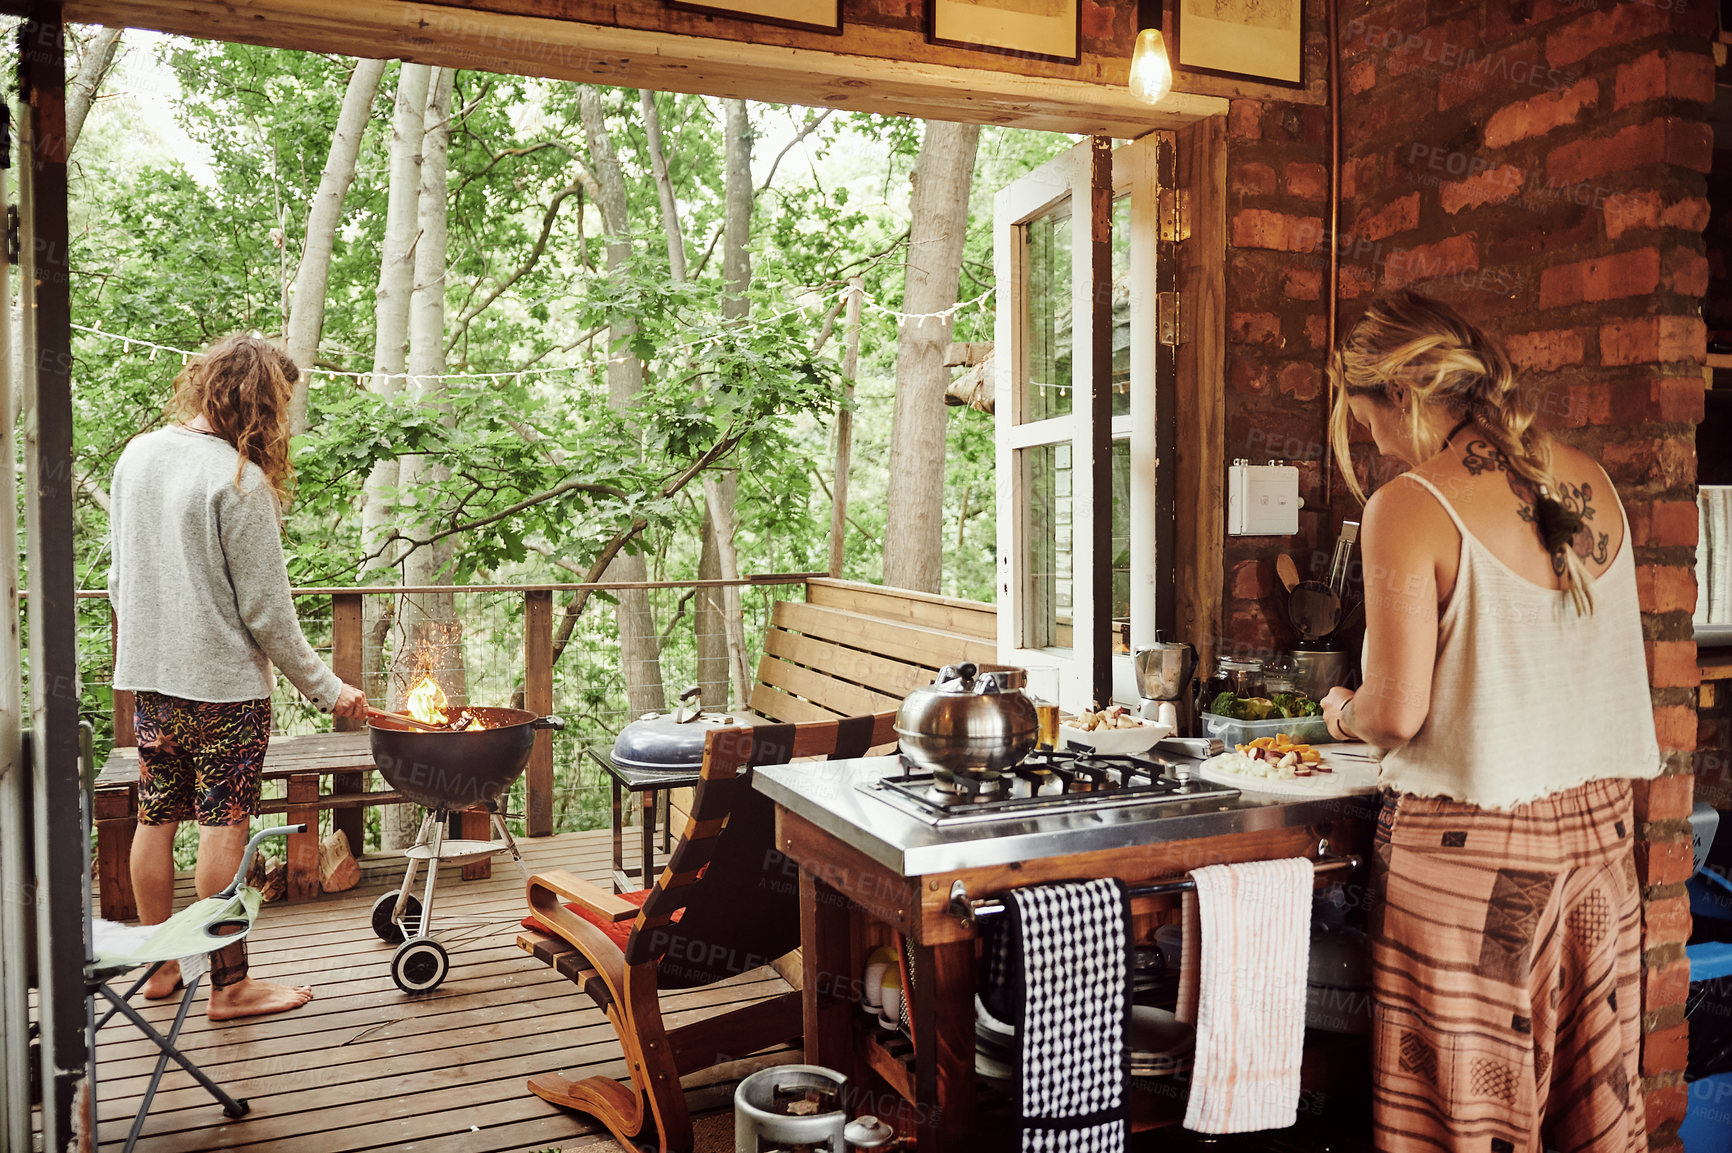 Buy stock photo Shot of a young couple preparing dinner while on vacation in a cabin